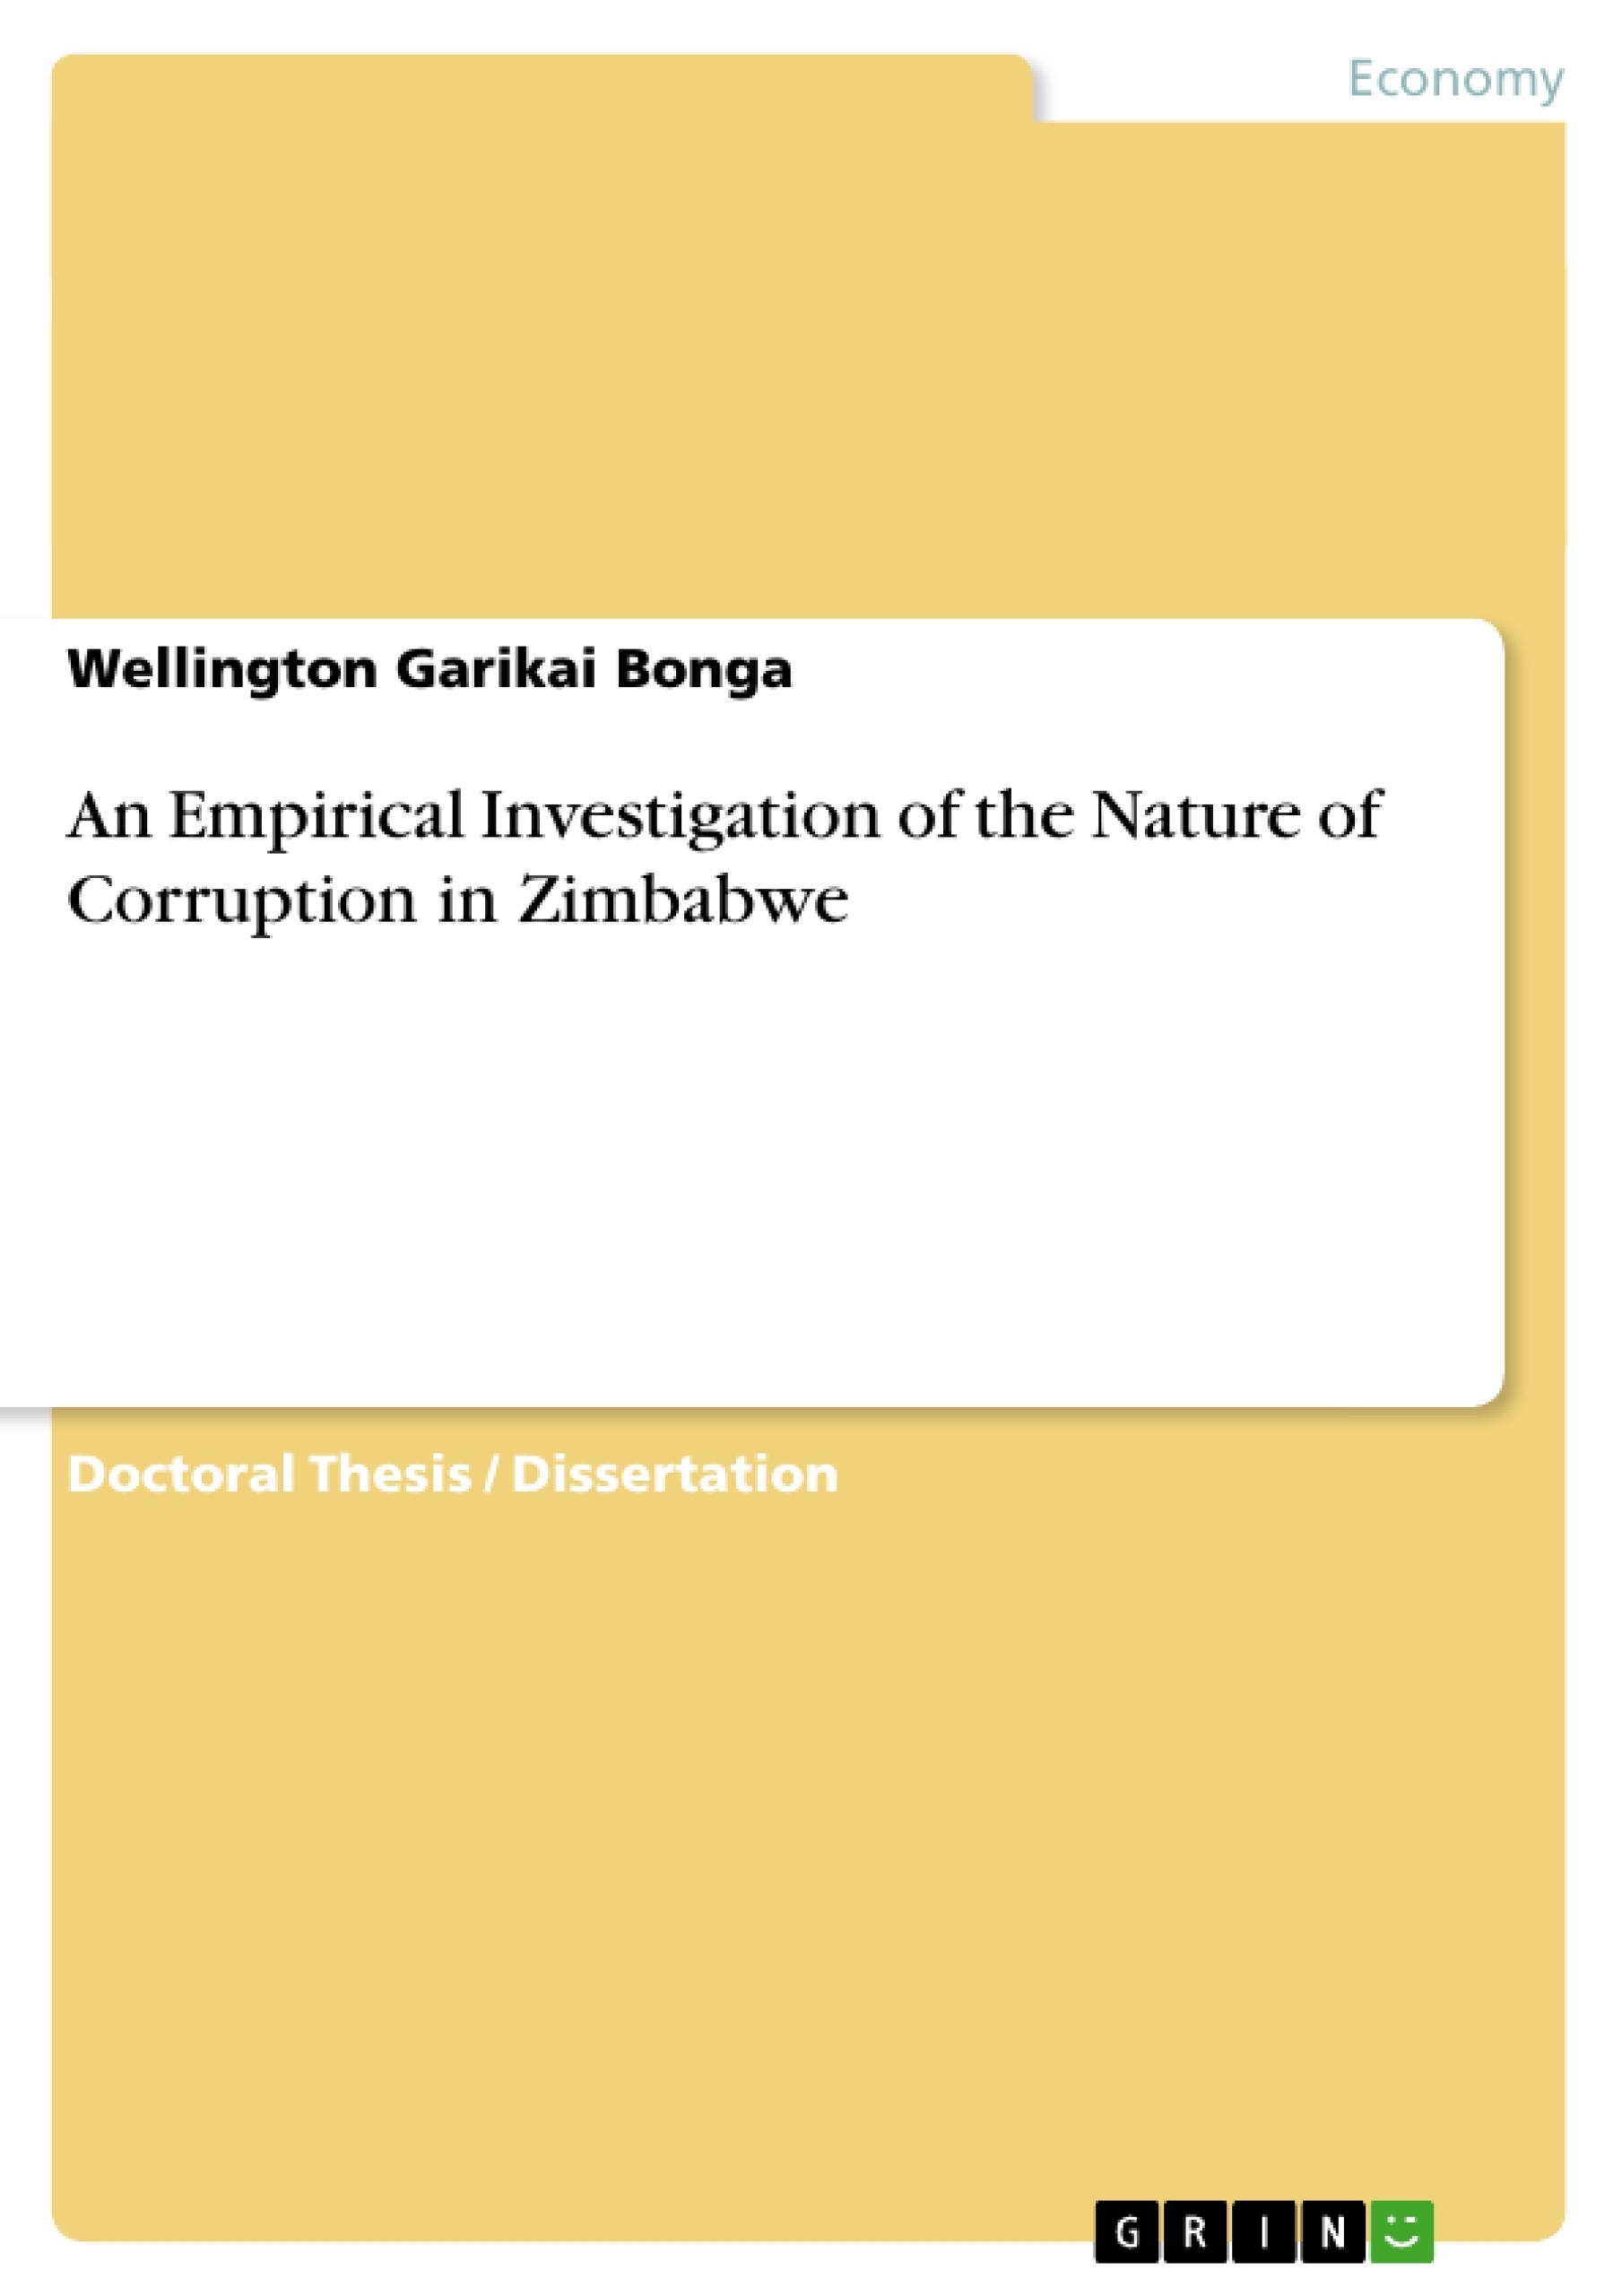 Título: An Empirical Investigation of the Nature of Corruption in Zimbabwe